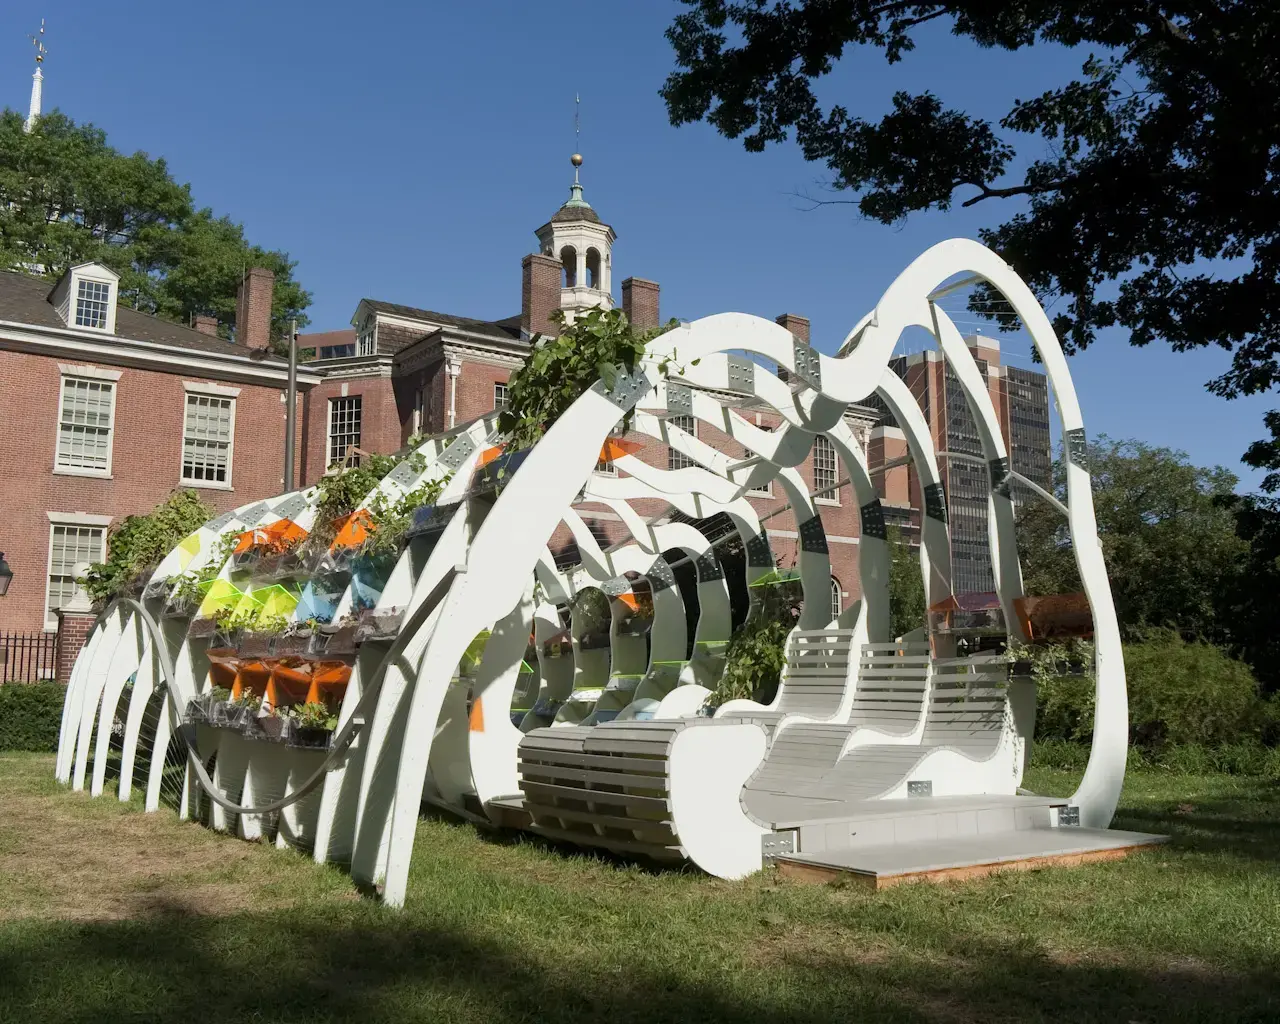 The Greenhouse Projects&nbsp;installation at the American Philosophical Society Museum, designed by architect and 2010 Pew Fellow Jenny Sabin. Photo courtesy of the American Philosophical Society Museum.